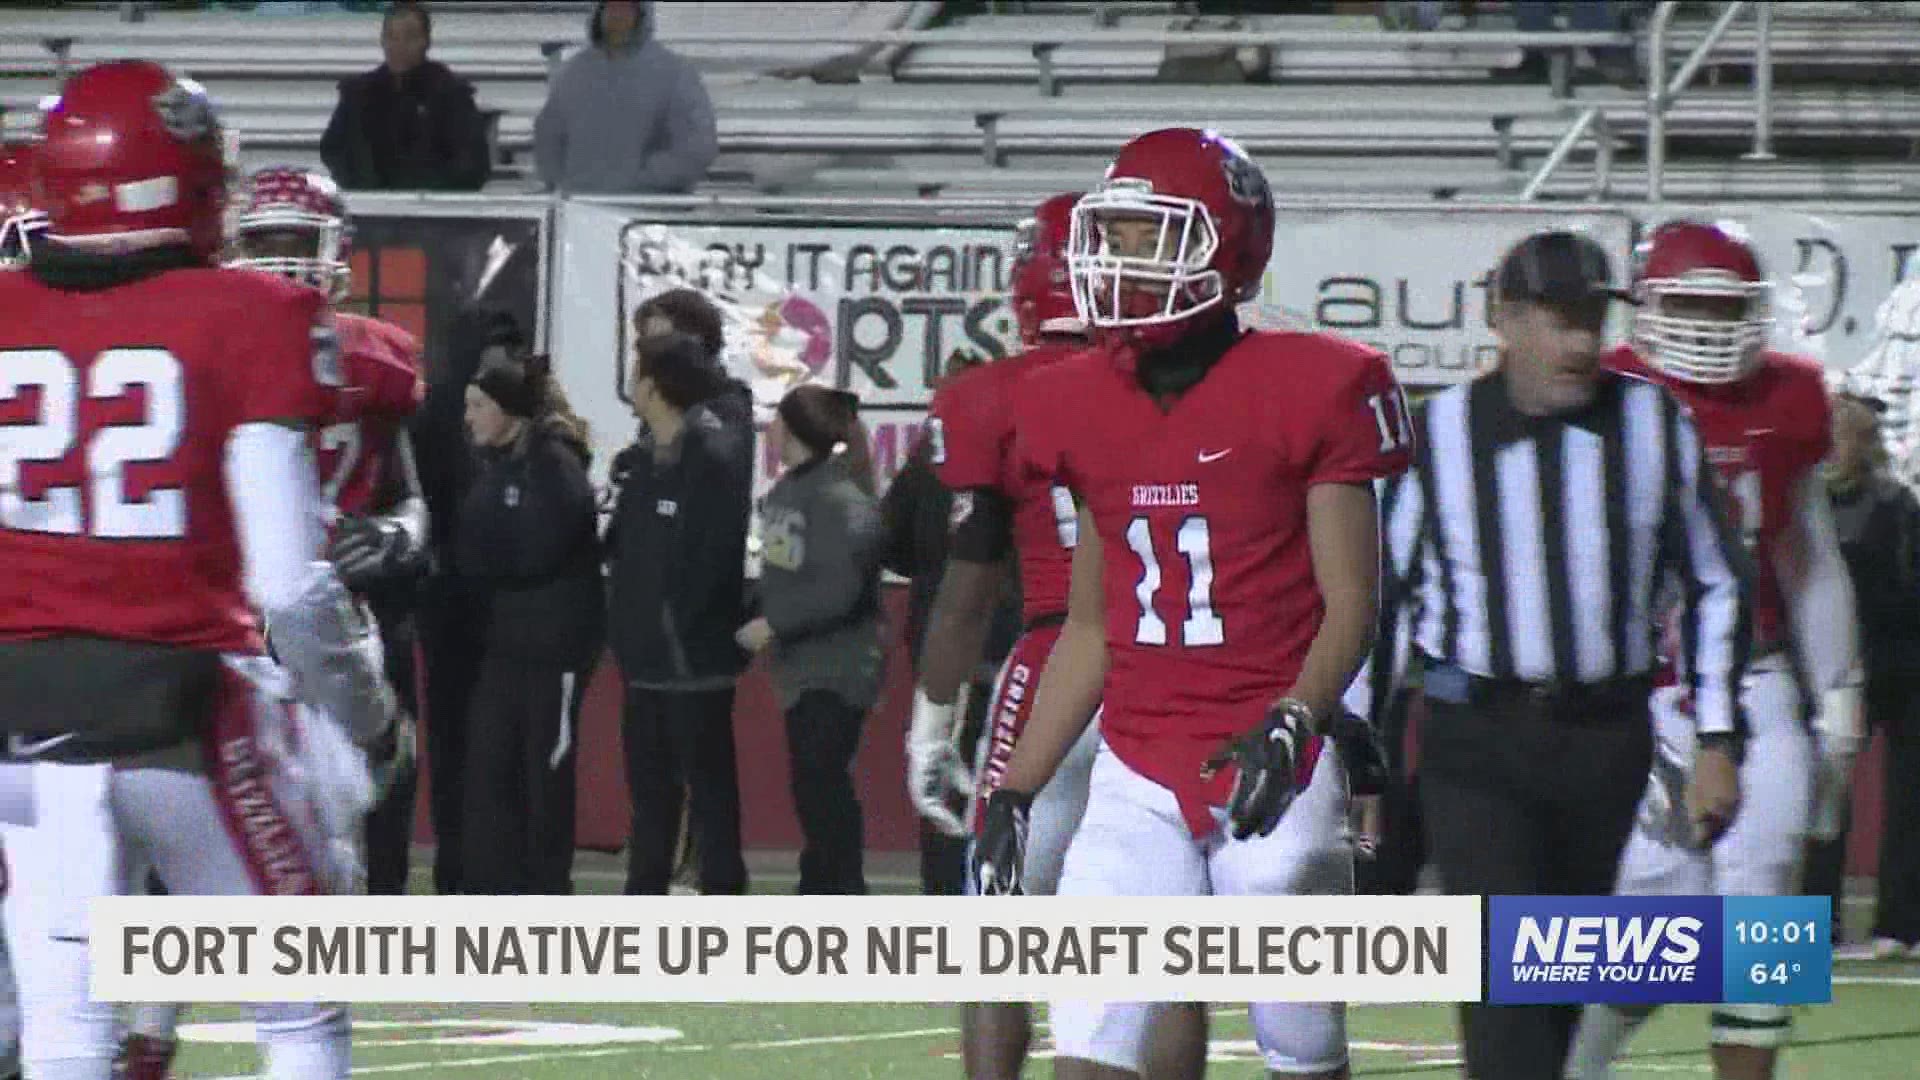 A Fort Smith native is a high possibility for selection during this week's NFL draft.